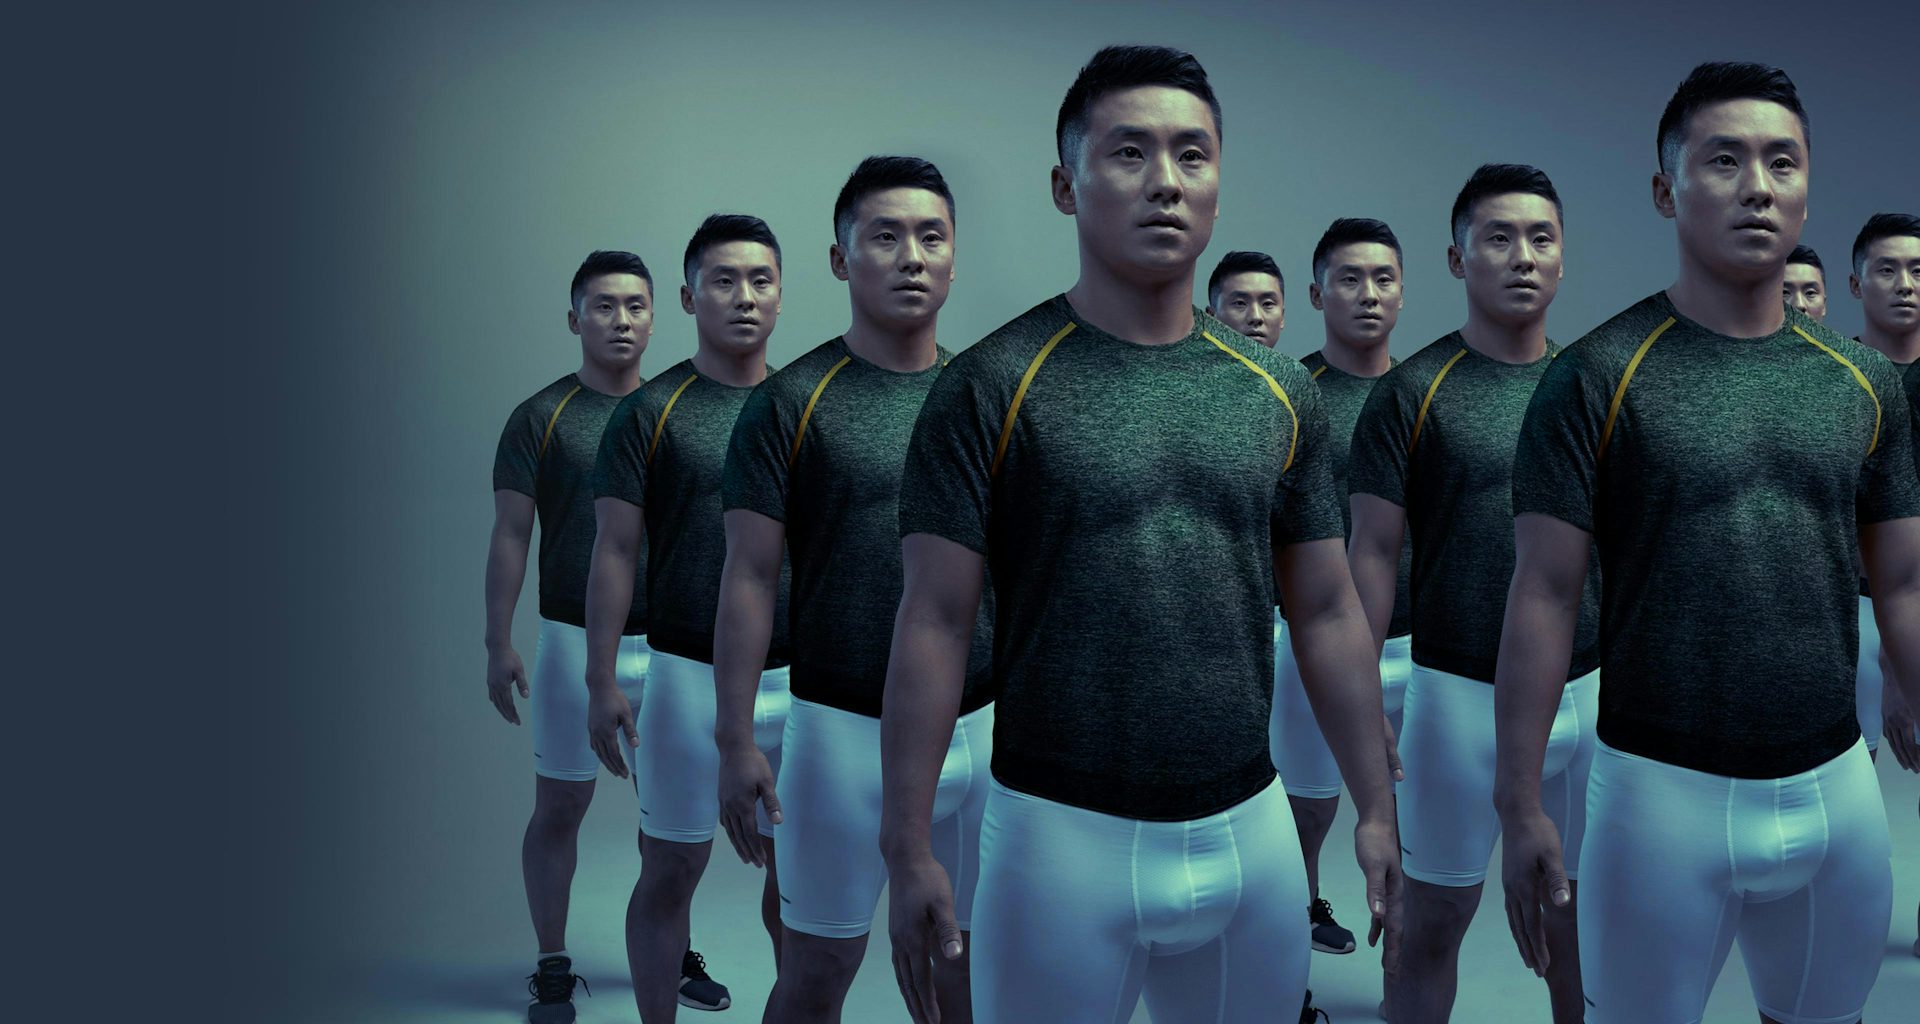 An Asian/Pacific Islander man standing with clones of him next to each other